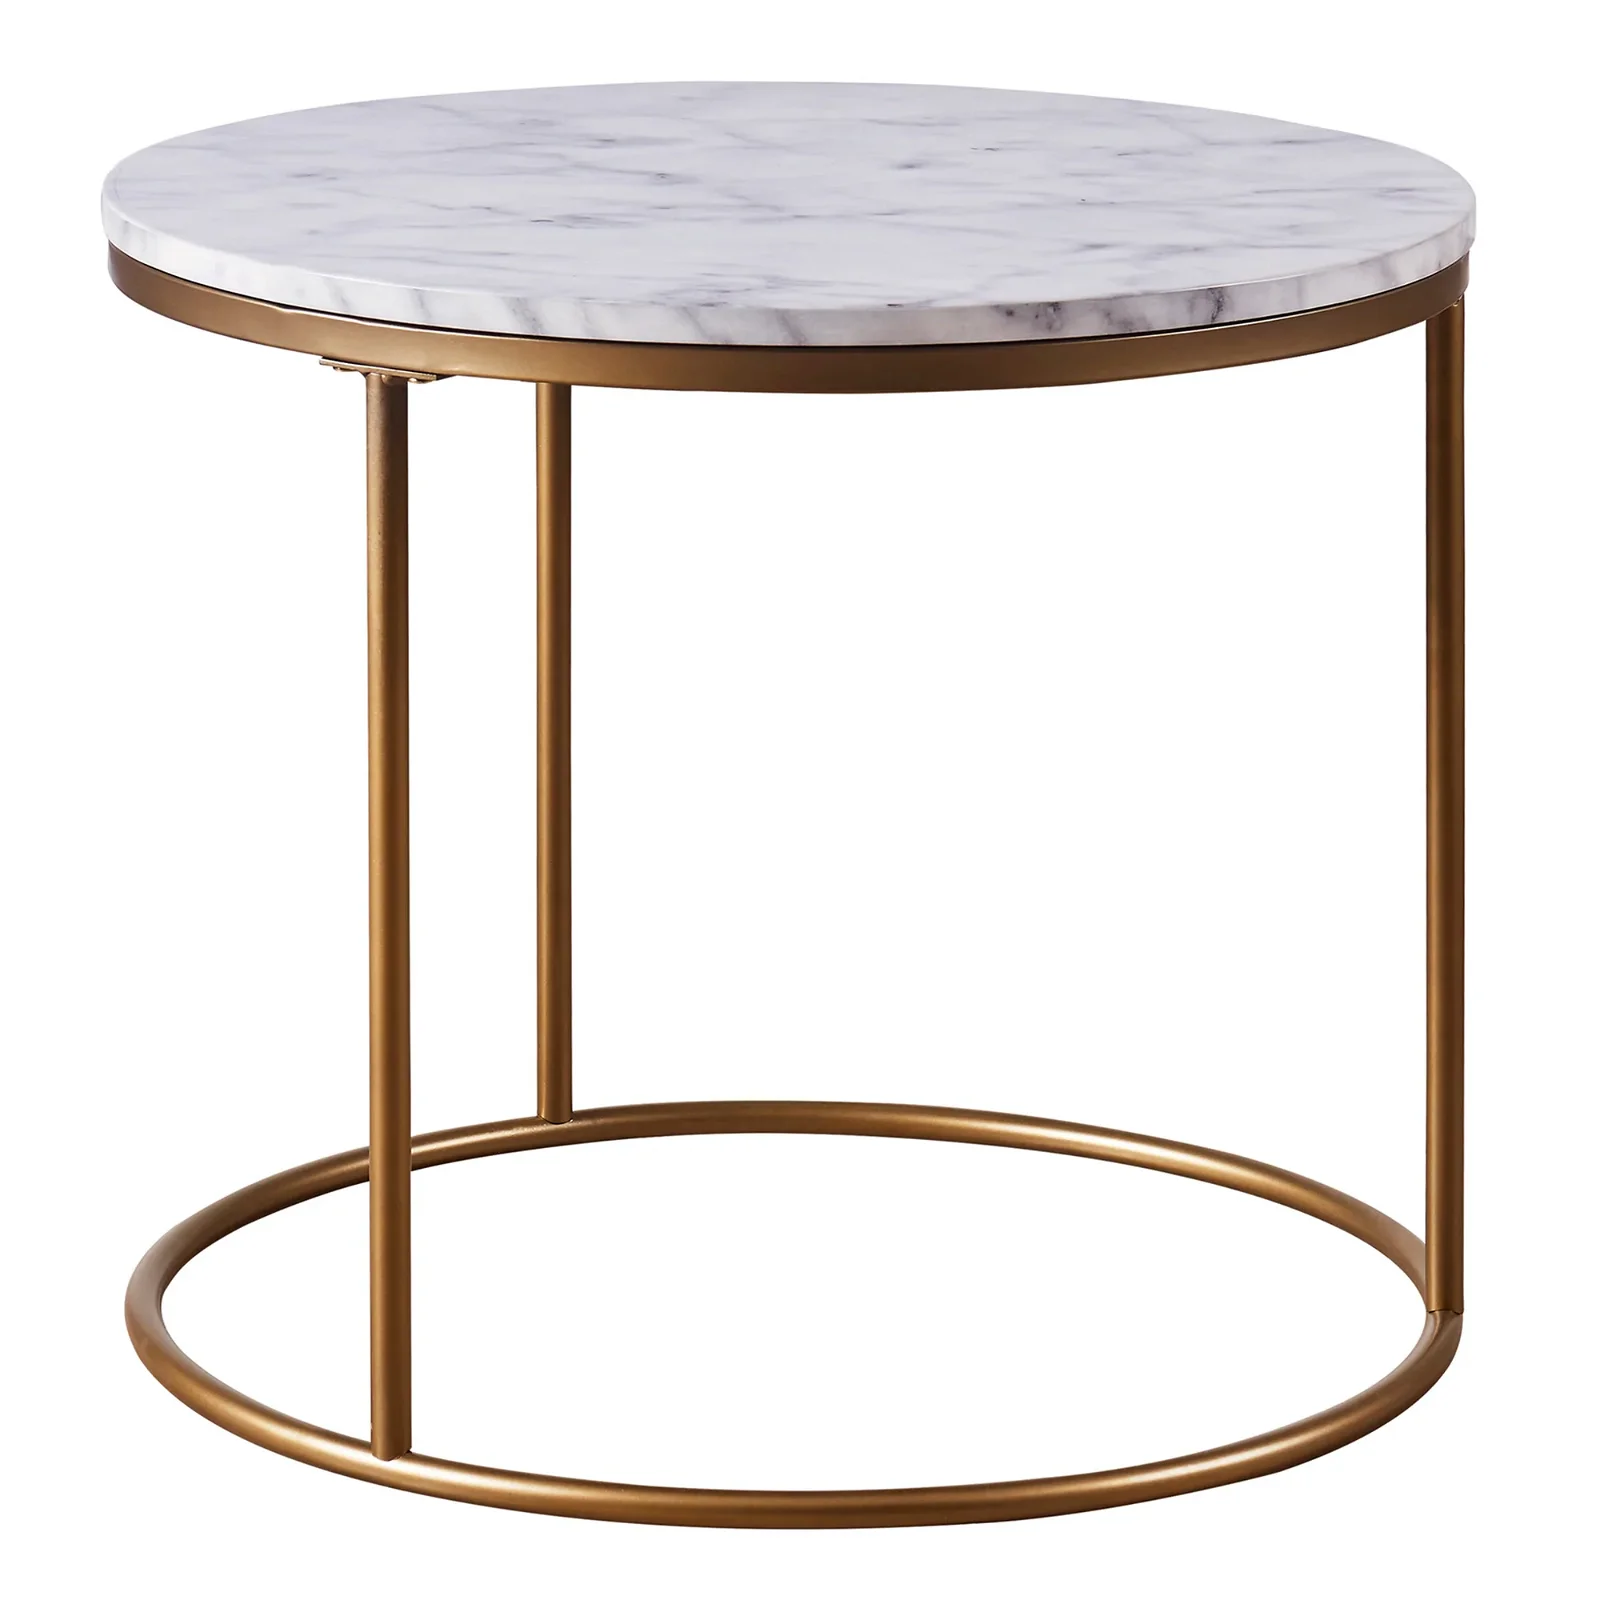 Image of Teamson Home Marmo Round Side Table with Open Base & Faux White Marble Top, White/Brass